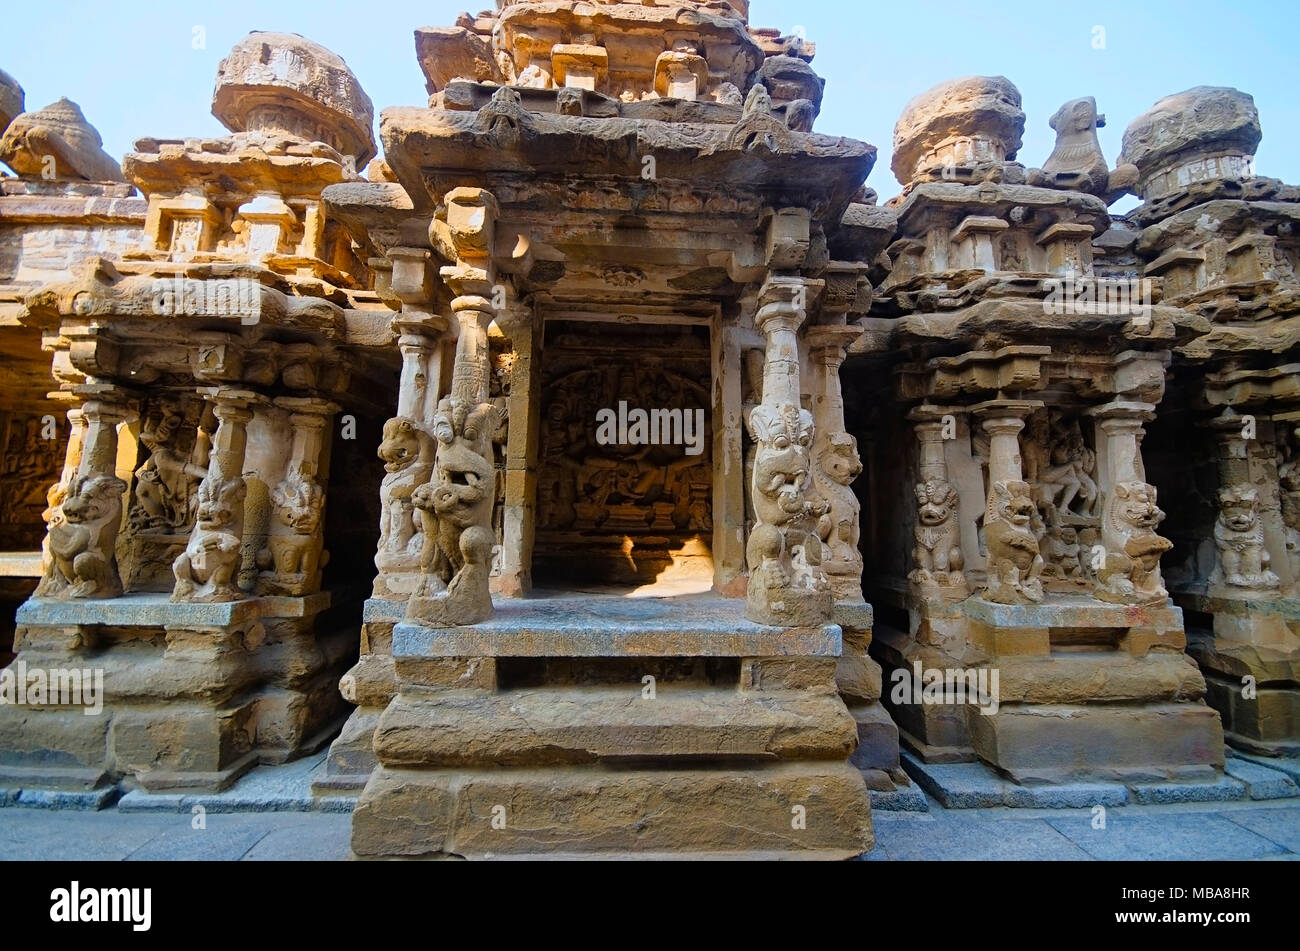 Outer view of Kailasanathar temple, Kanchipuram, Tamil Nadu, India. Hindu temple in the Dravidian architectural style, dedicated to the Lord Shiva. Bu Stock Photo